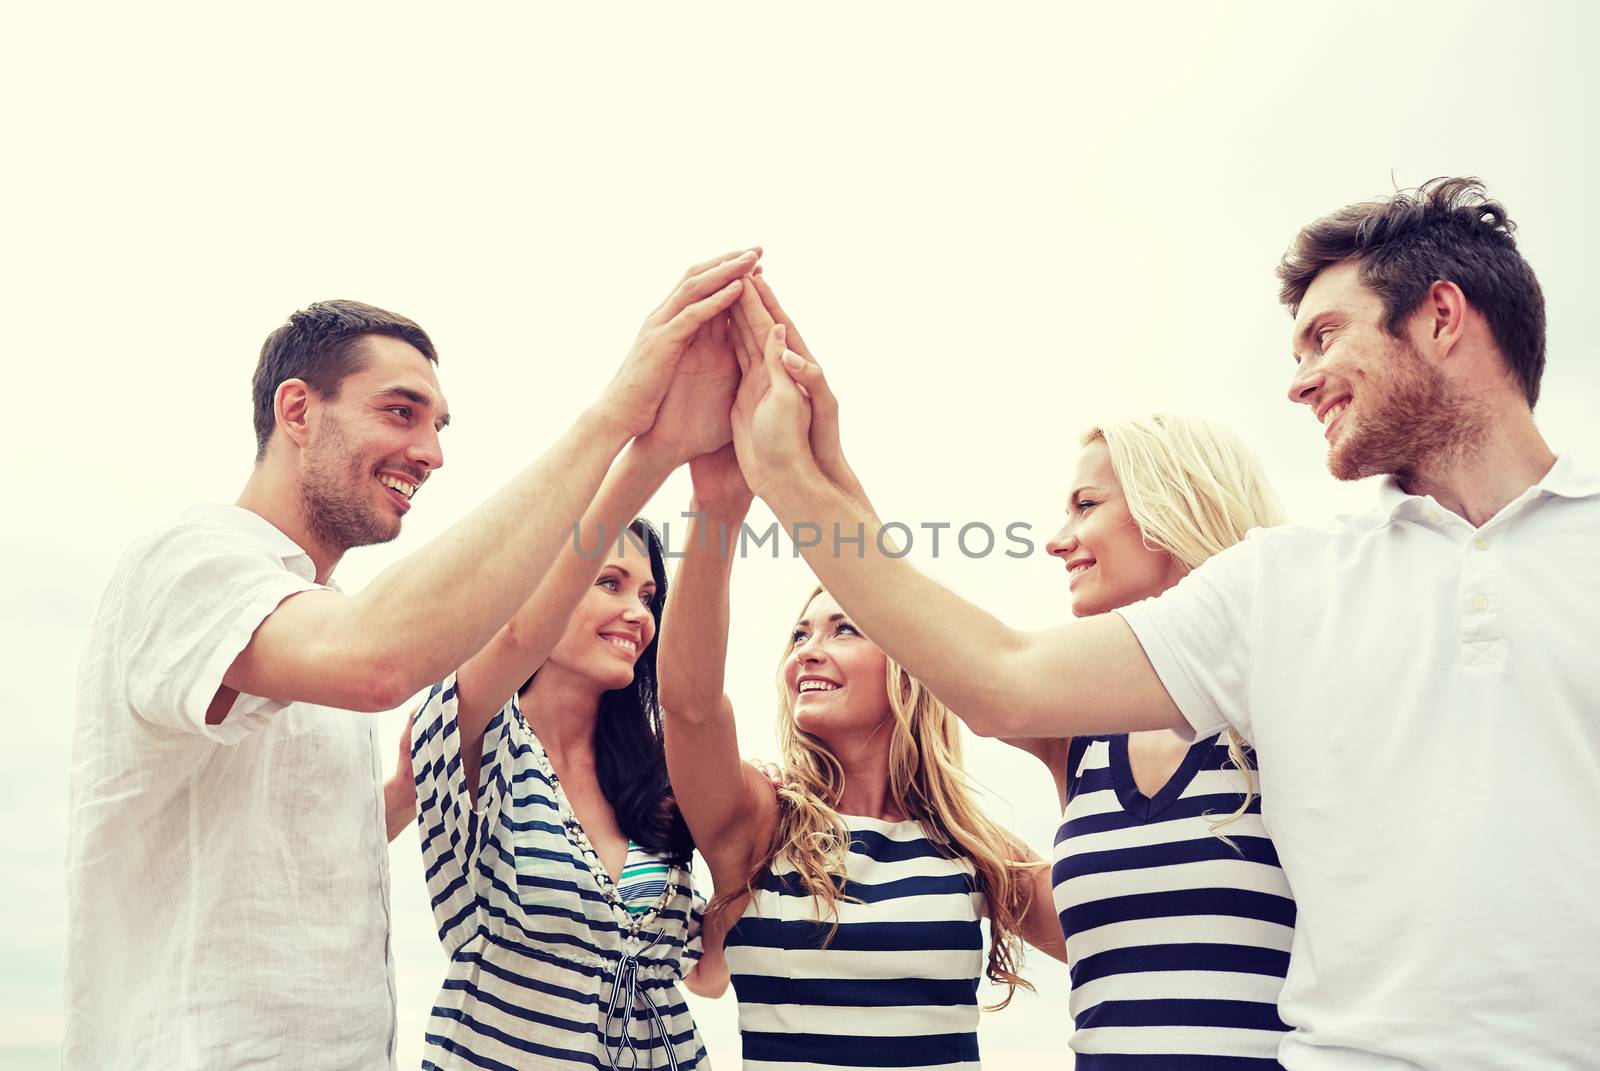 smiling friends making high five gesture outdoors by dolgachov